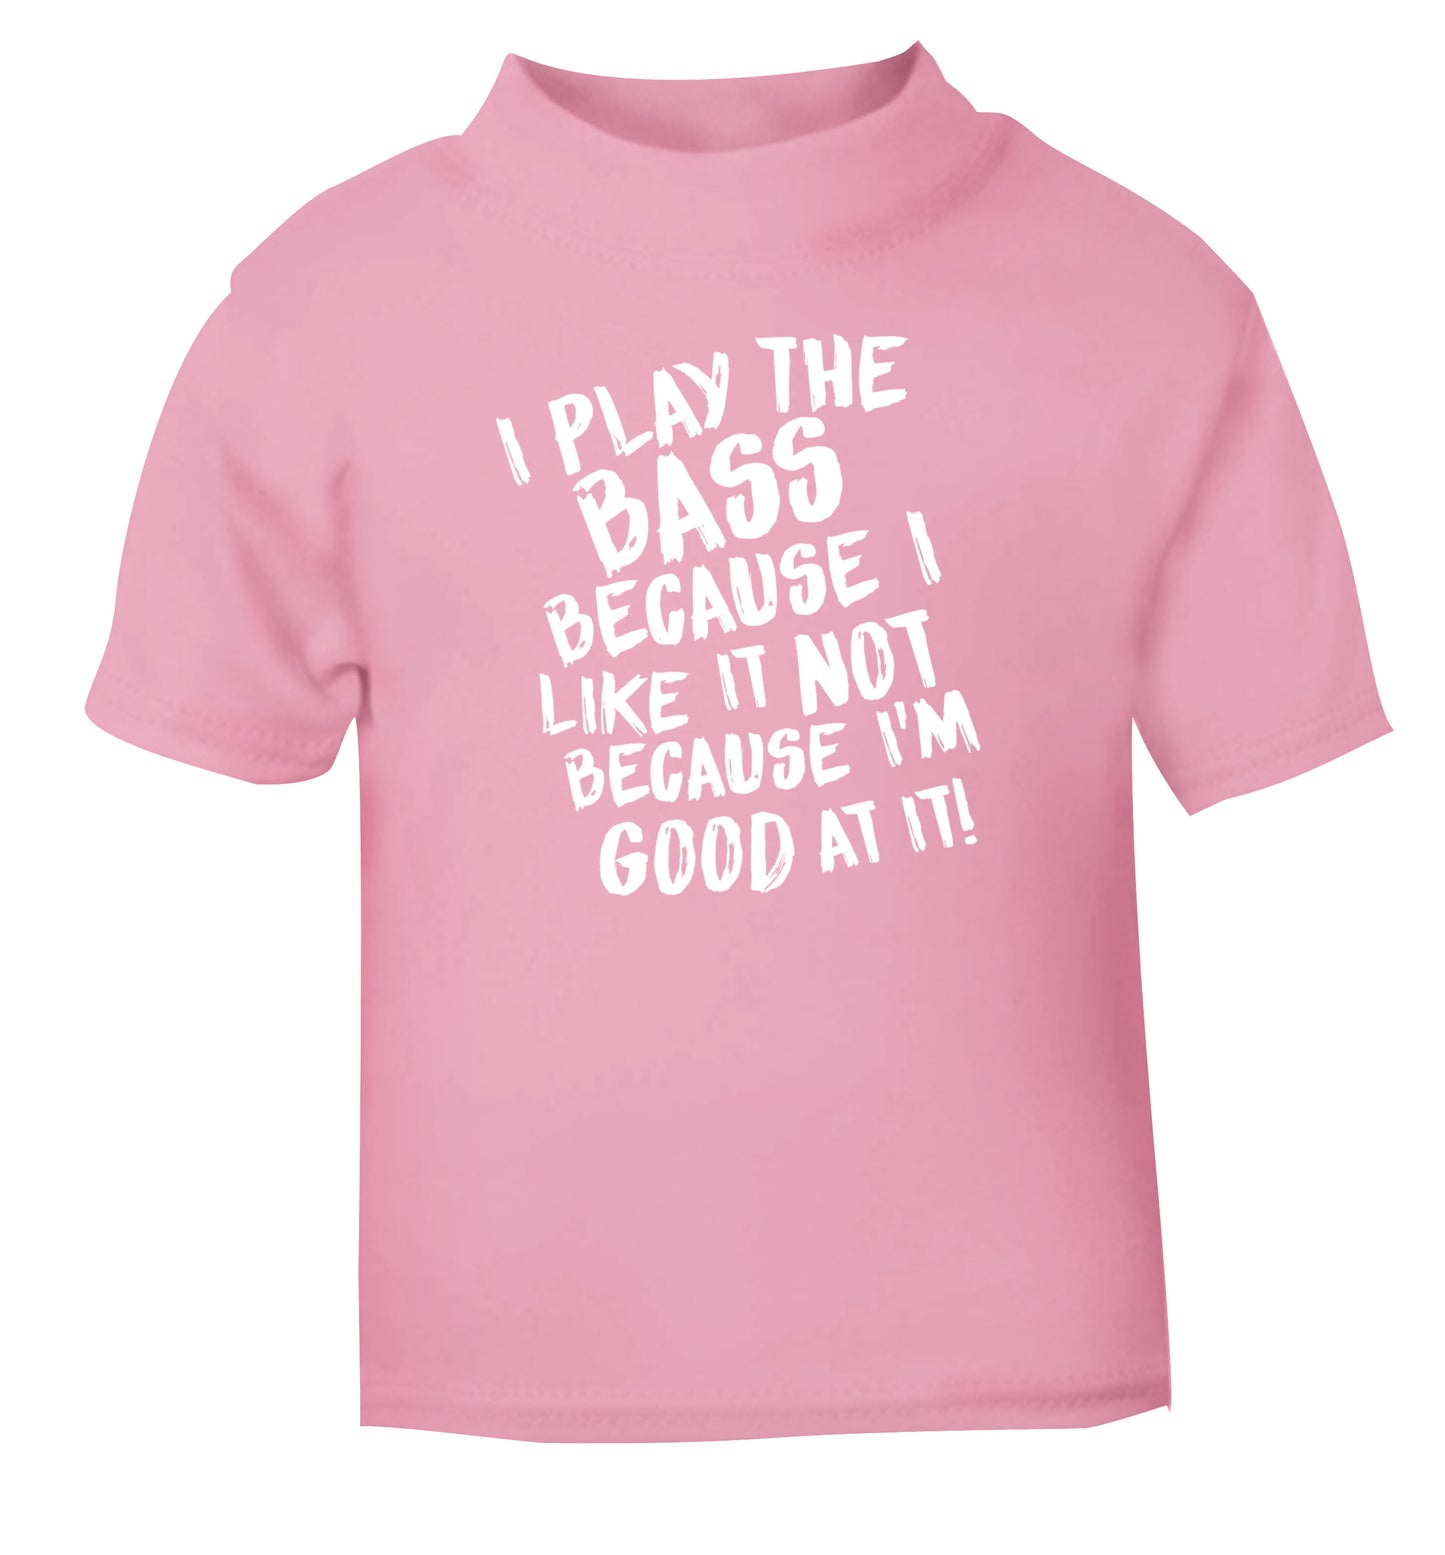 I play the bass because I like it not because I'm good at it light pink Baby Toddler Tshirt 2 Years